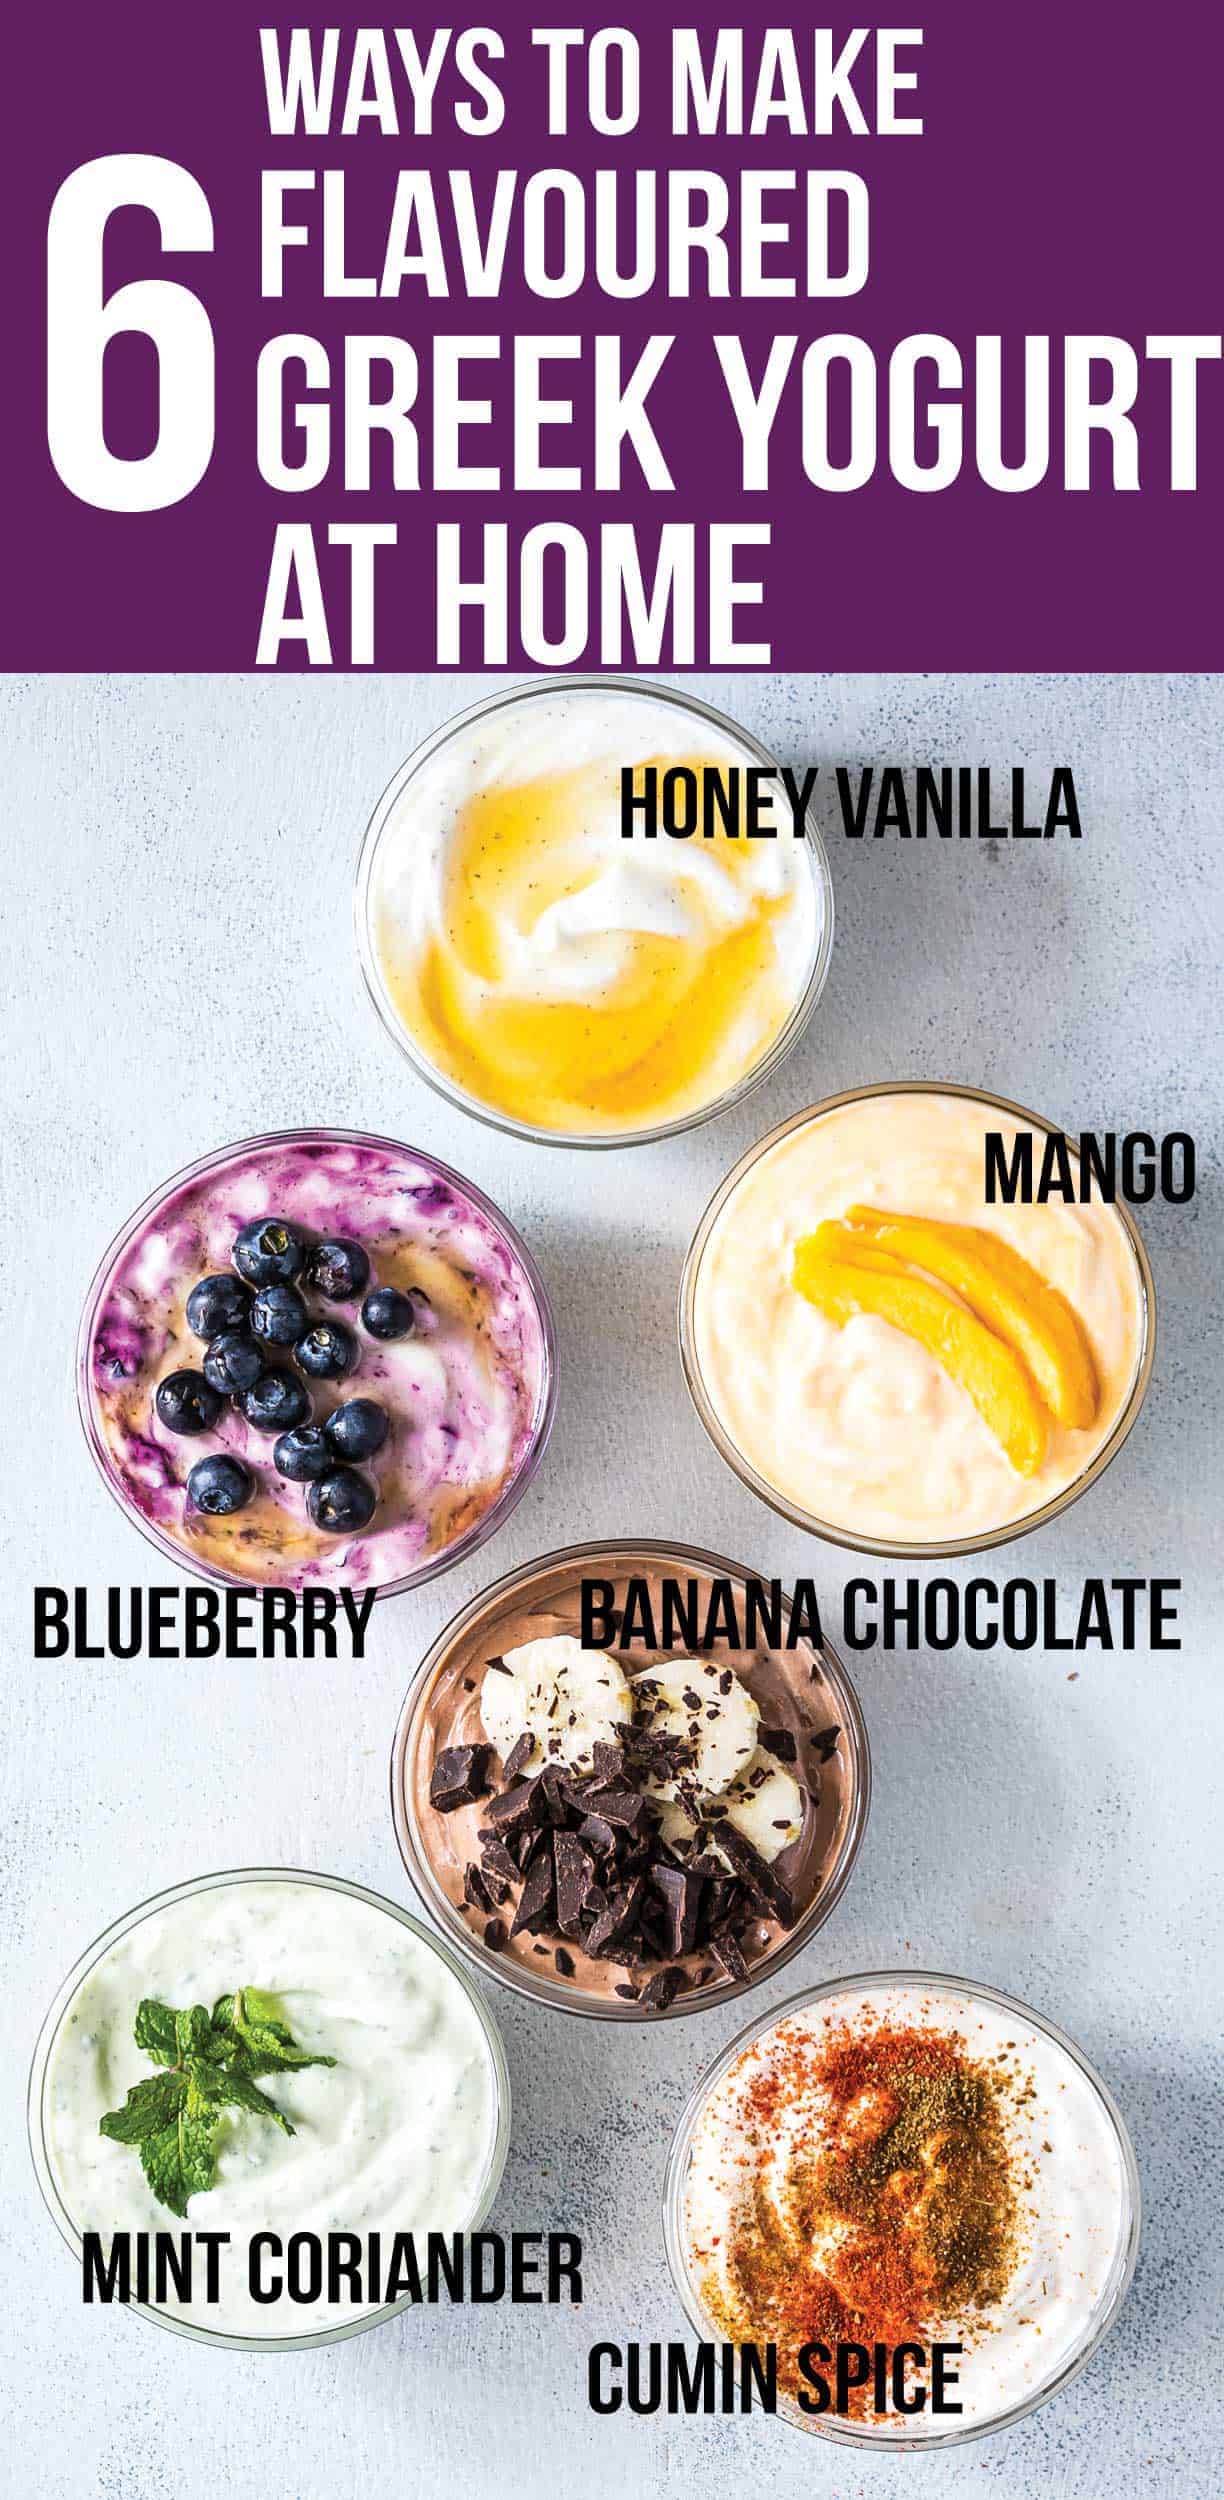 These six healthy Greek yogurt flavors are homemade and will become your breakfast buddies. Pick between honey vanilla, mango, blueberry, banana chocolate, mint coriander and cumin spice Greek yogurt or just make them all! No processed sugar, no fruit syrup or preservatives - just clean, healthy ingredients! You'll never go back to buying store bought flavored yogurt again.